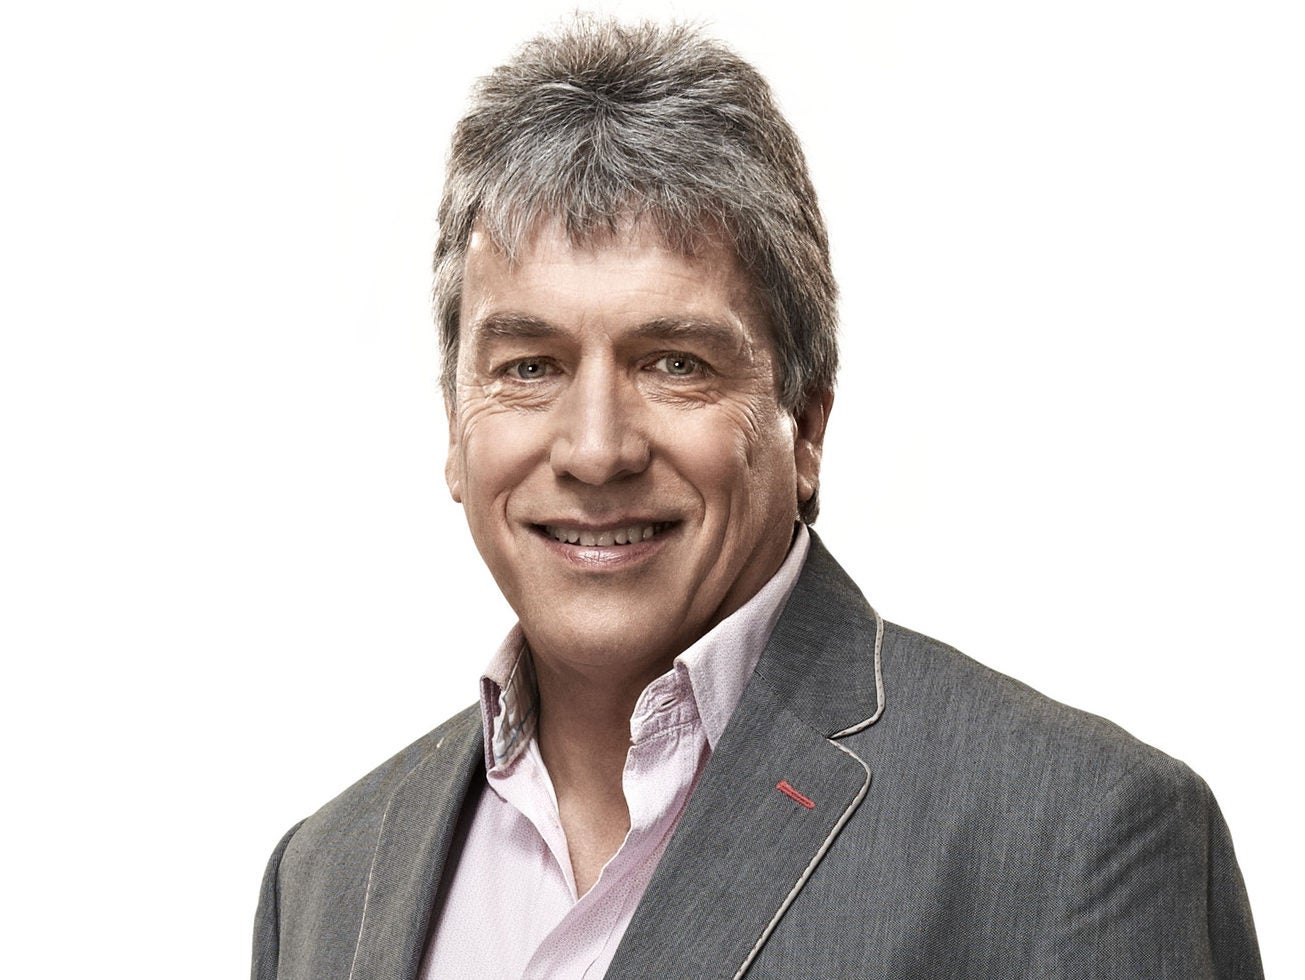 John Inverdale predicts next 'battleground' for radio will be live sports rights as commercial stations boom